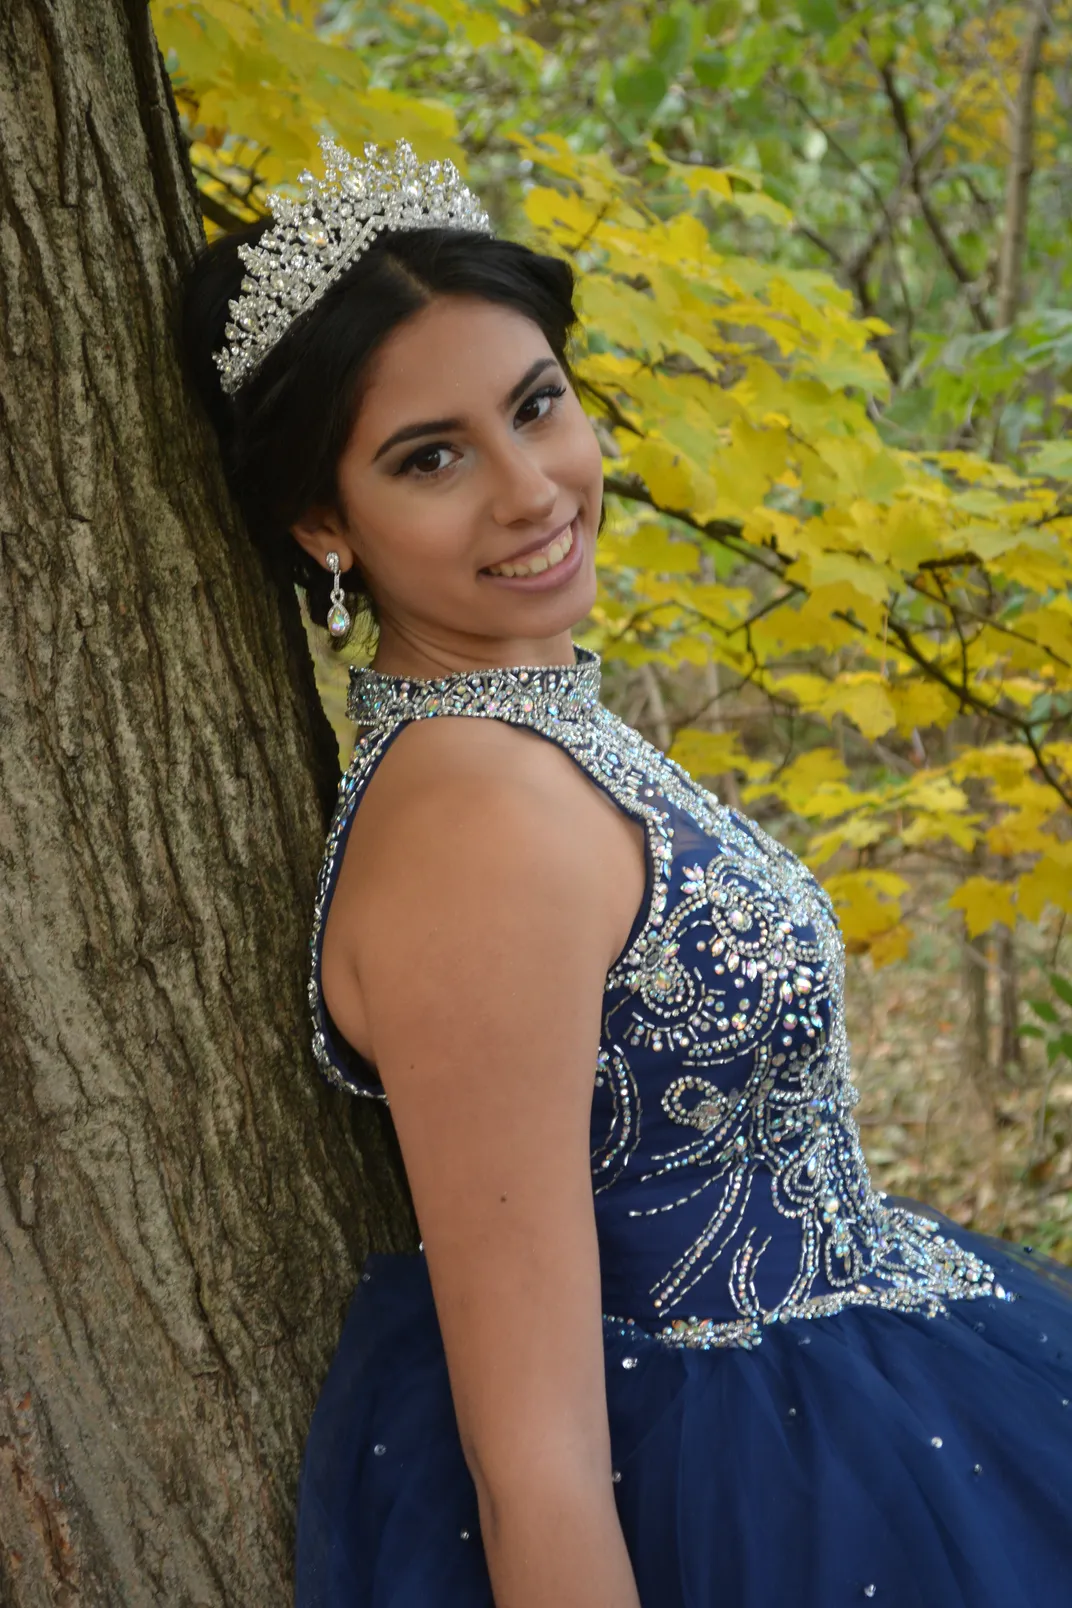 a woman in formal dress and crown leans on a tree